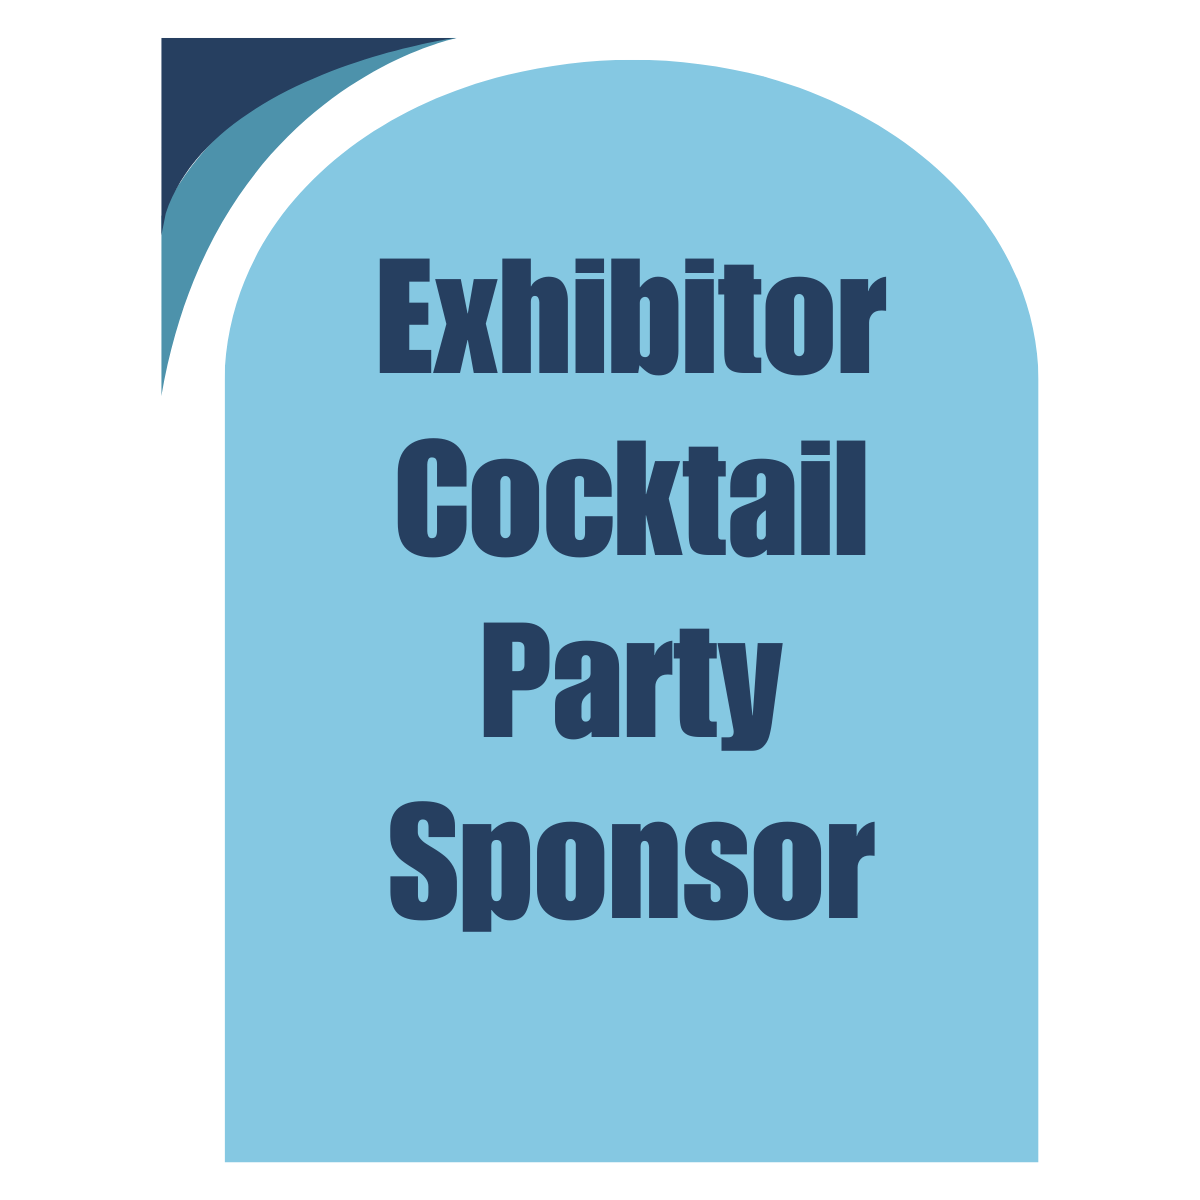 Exhibitor Cocktail Party Sponsor